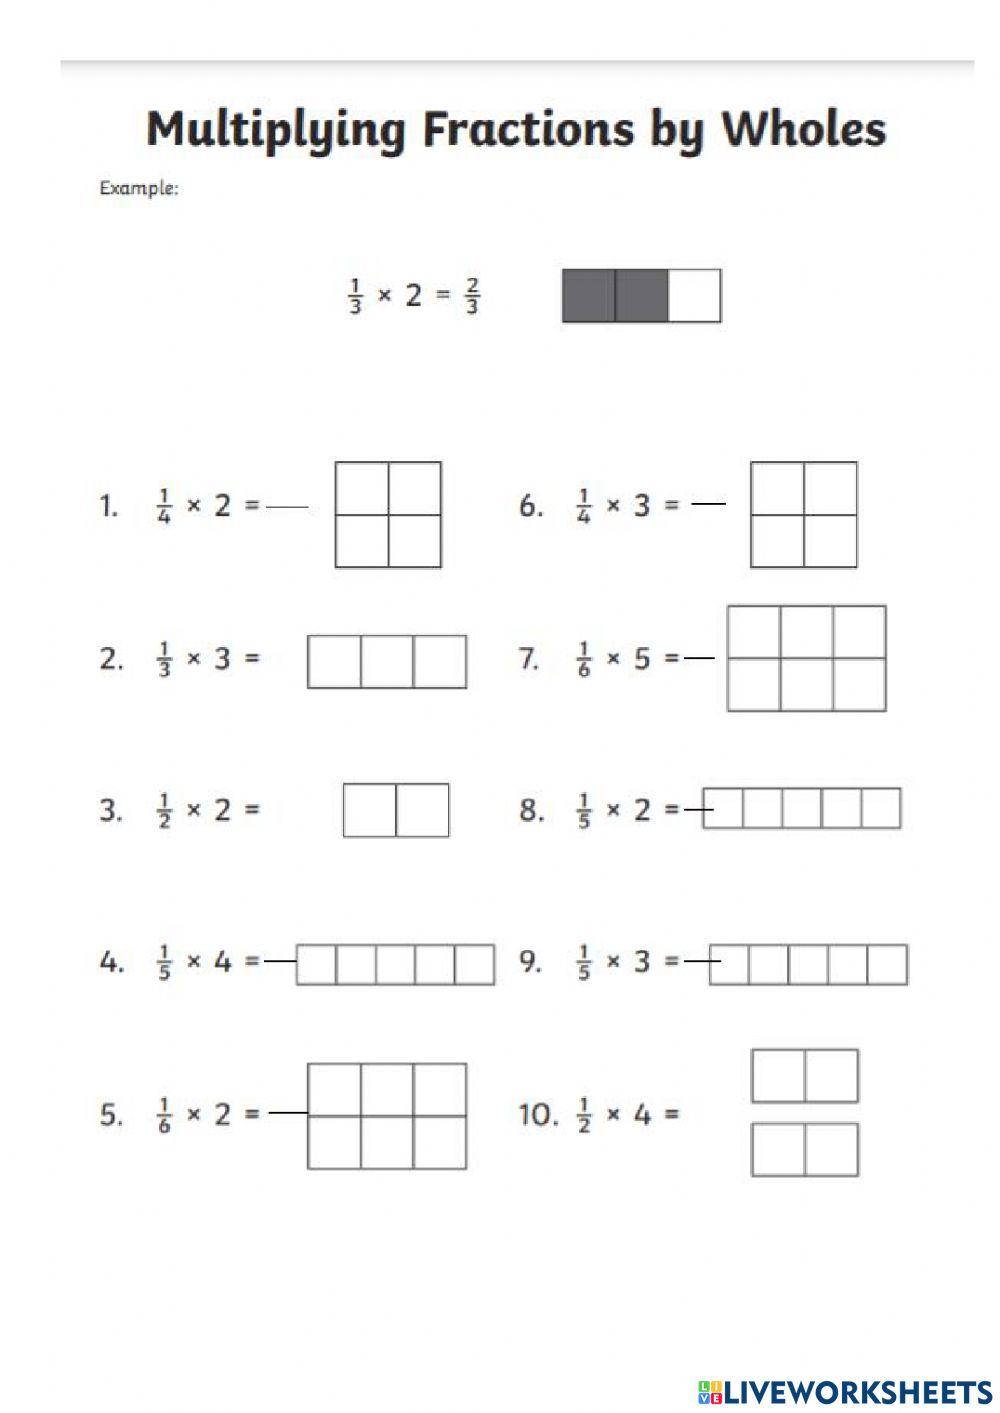 Multiply, compare fractions